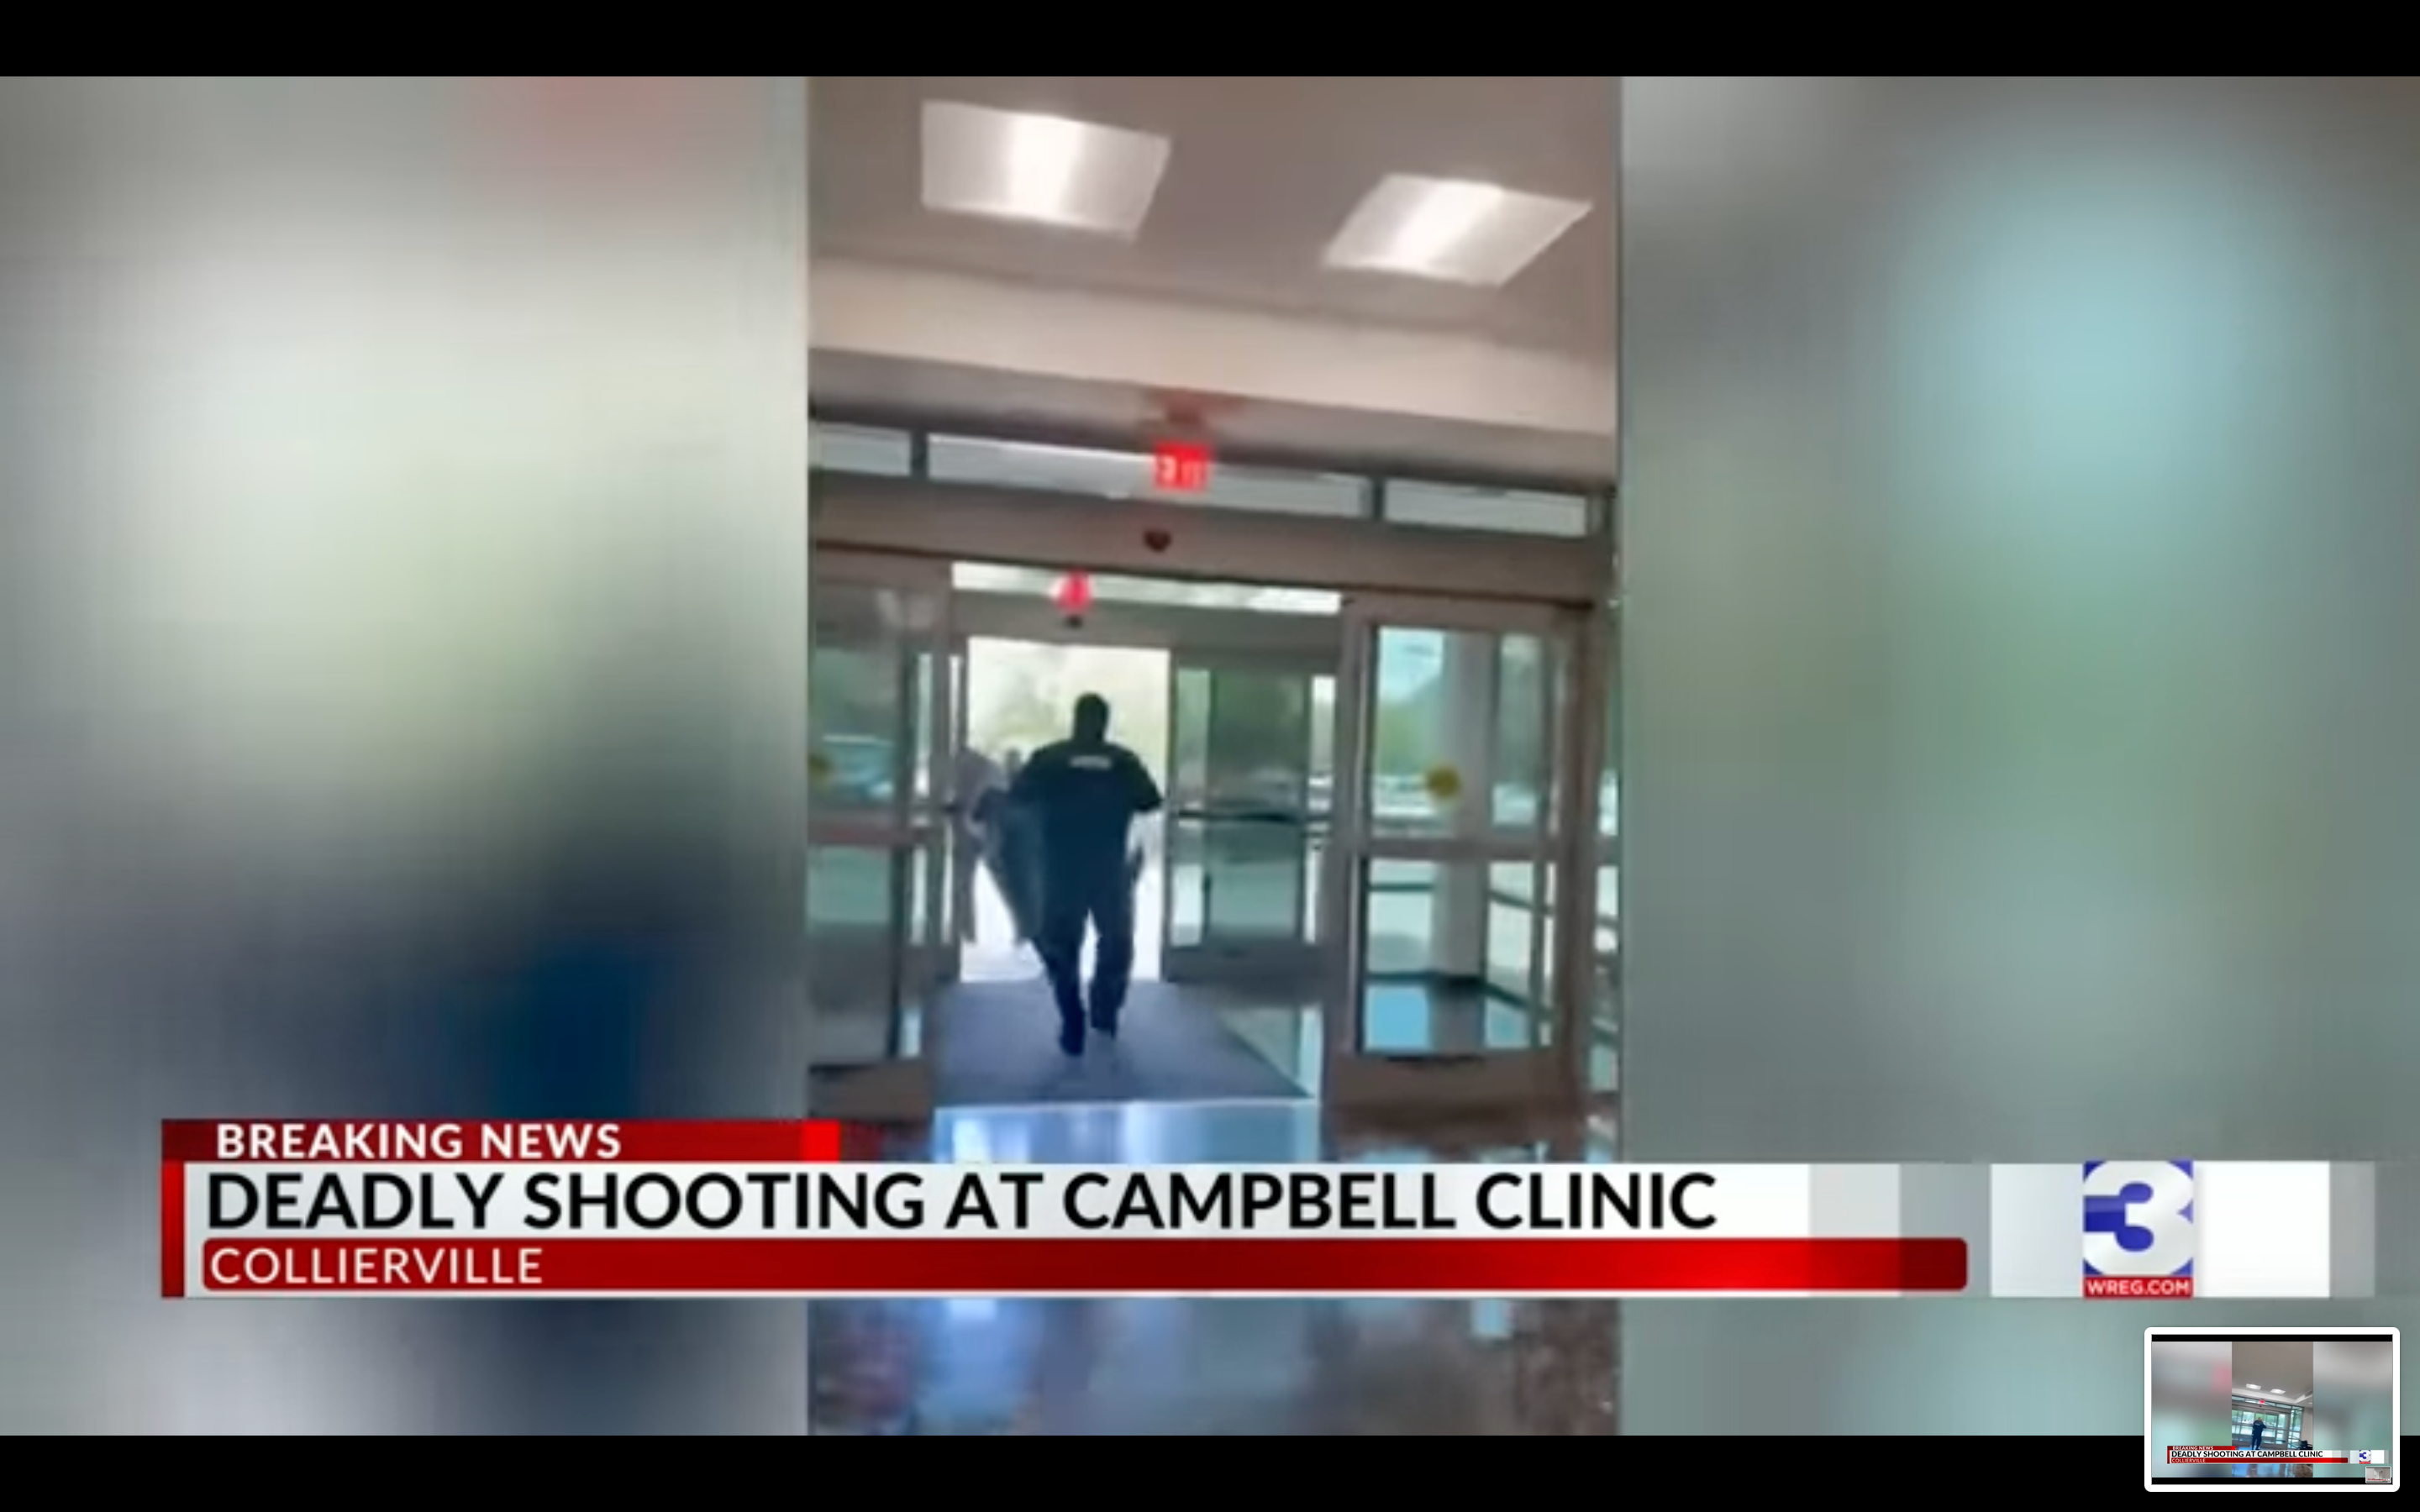 Police in Collierville, Tennessee, respond after surgeon Benjamin Mauck was shot dead in a clinic by a patient